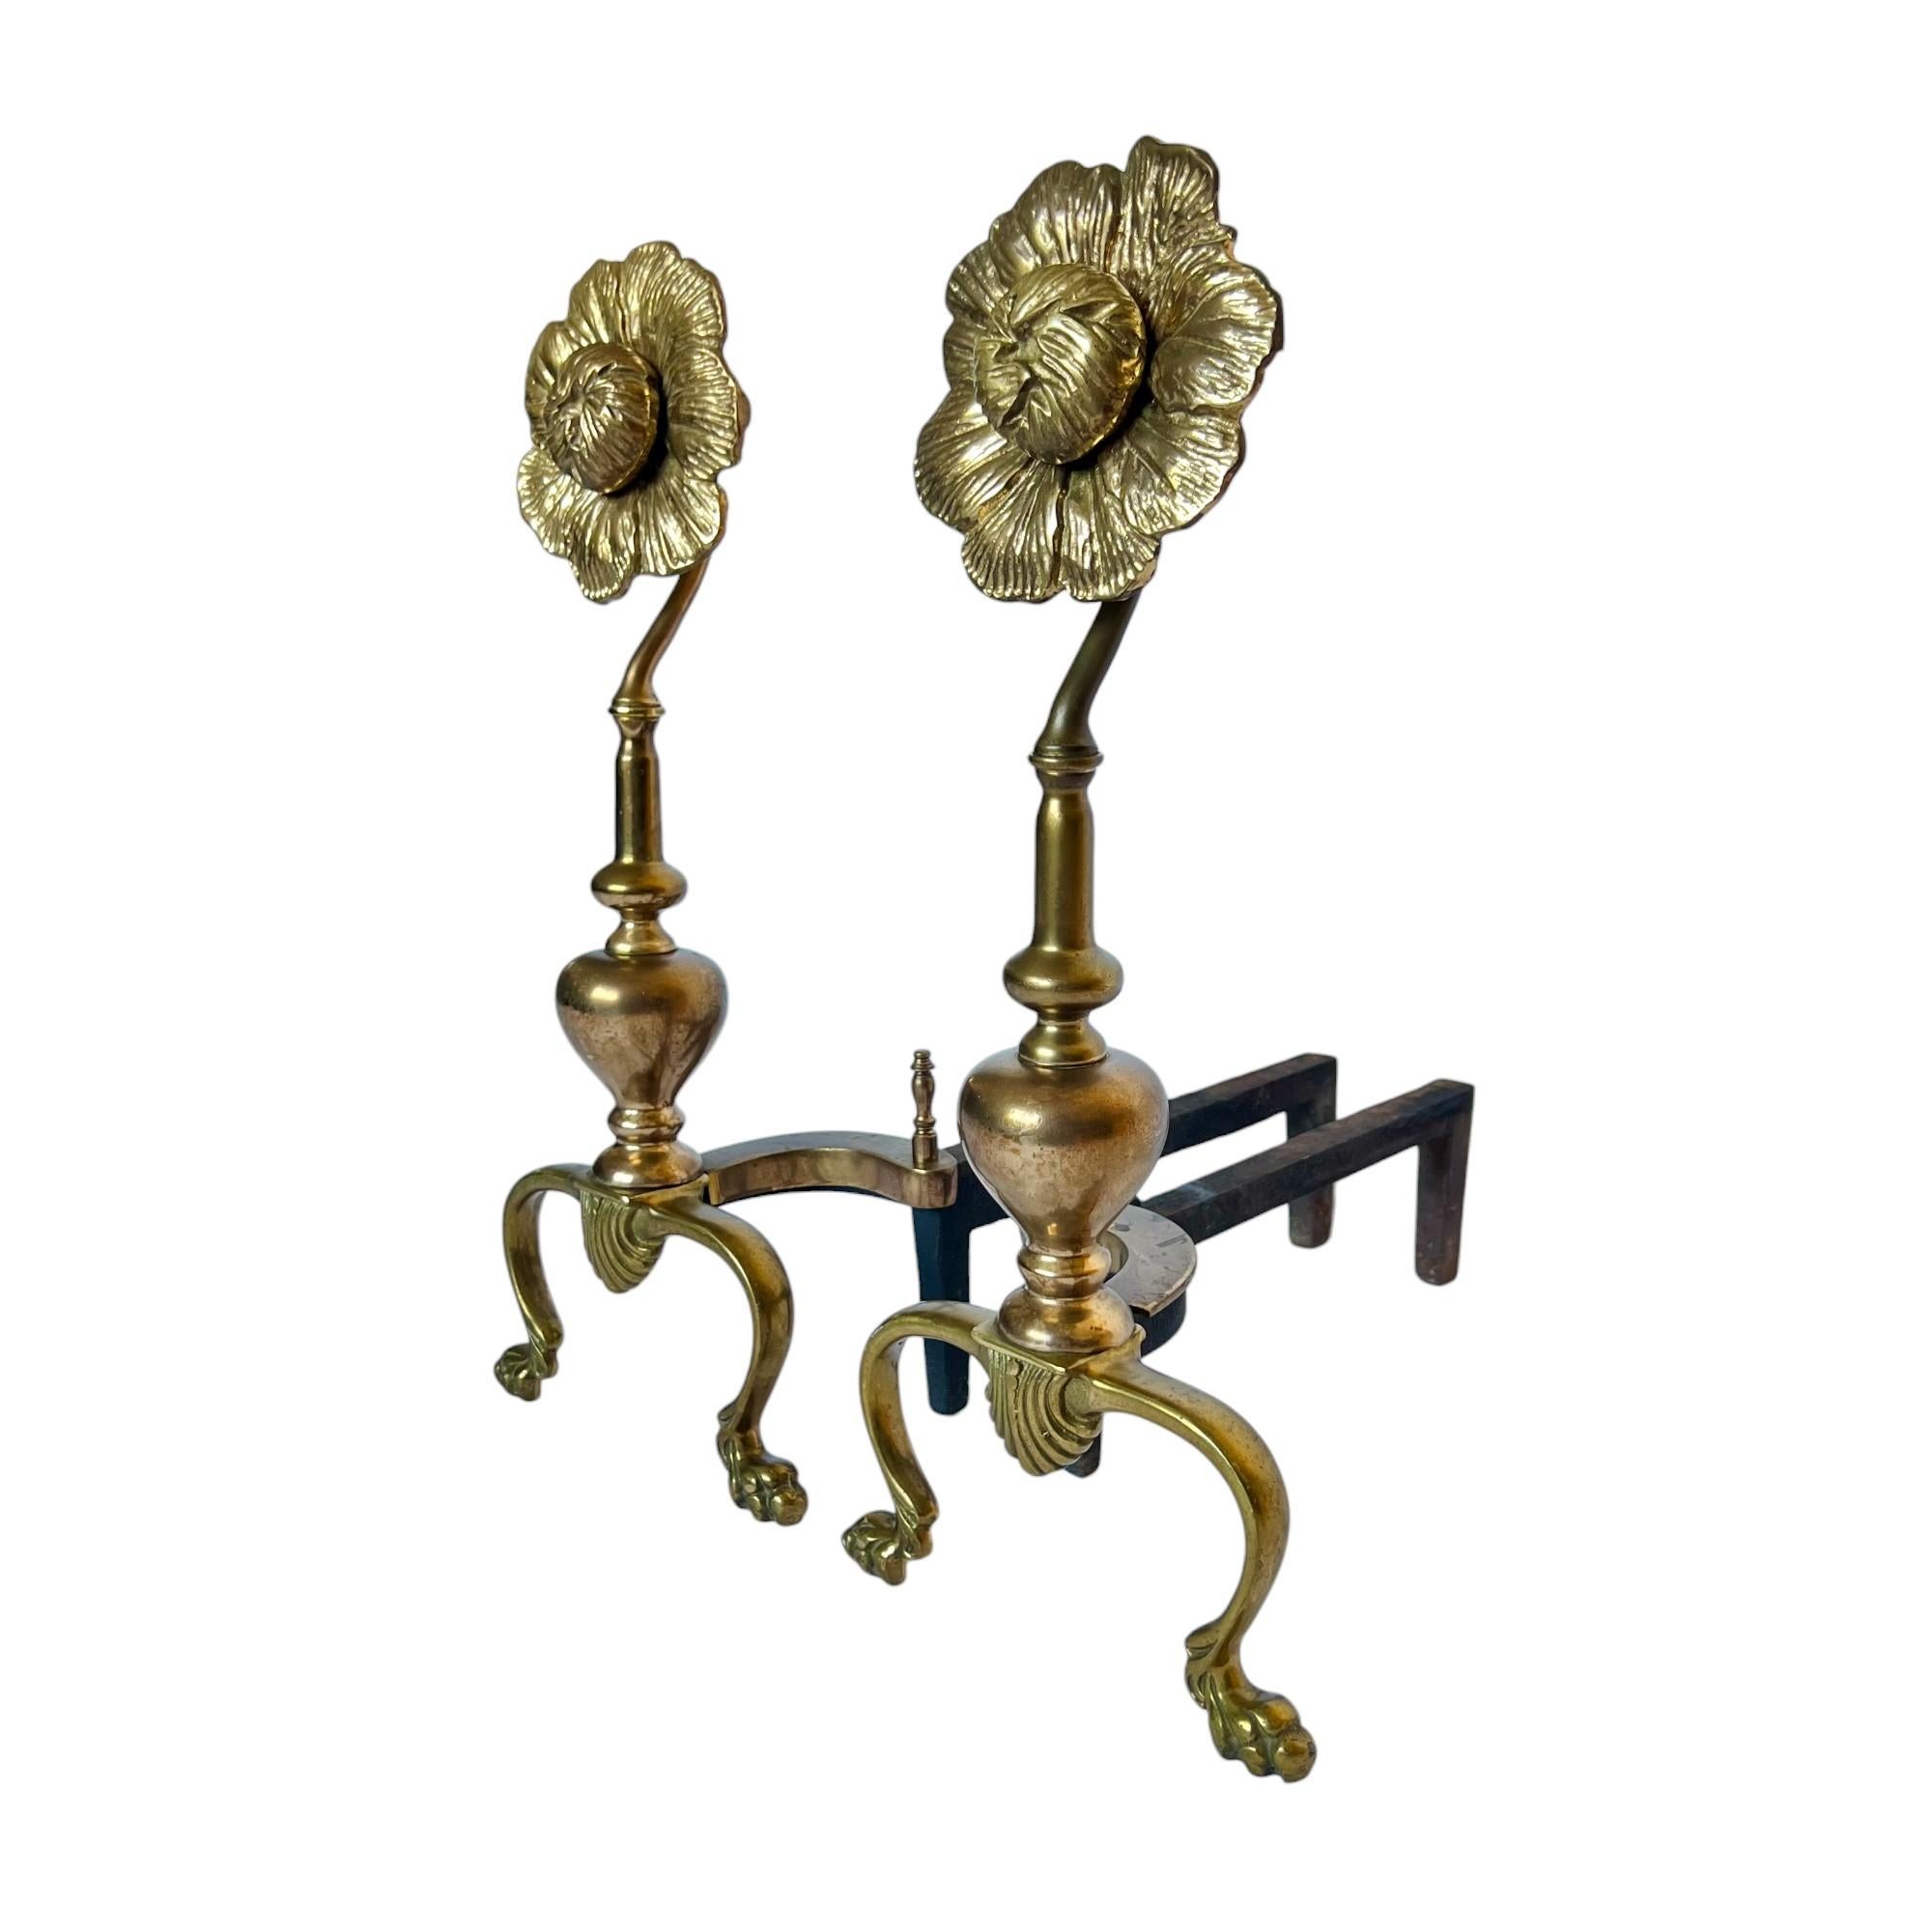 A uniquely beautiful pair of mid 20th century Hollywood regency andirons or chenets featuring a flower shaped top, scalloped detail and paw feet. Polished cast brass and iron.

Dimensions: 8.25